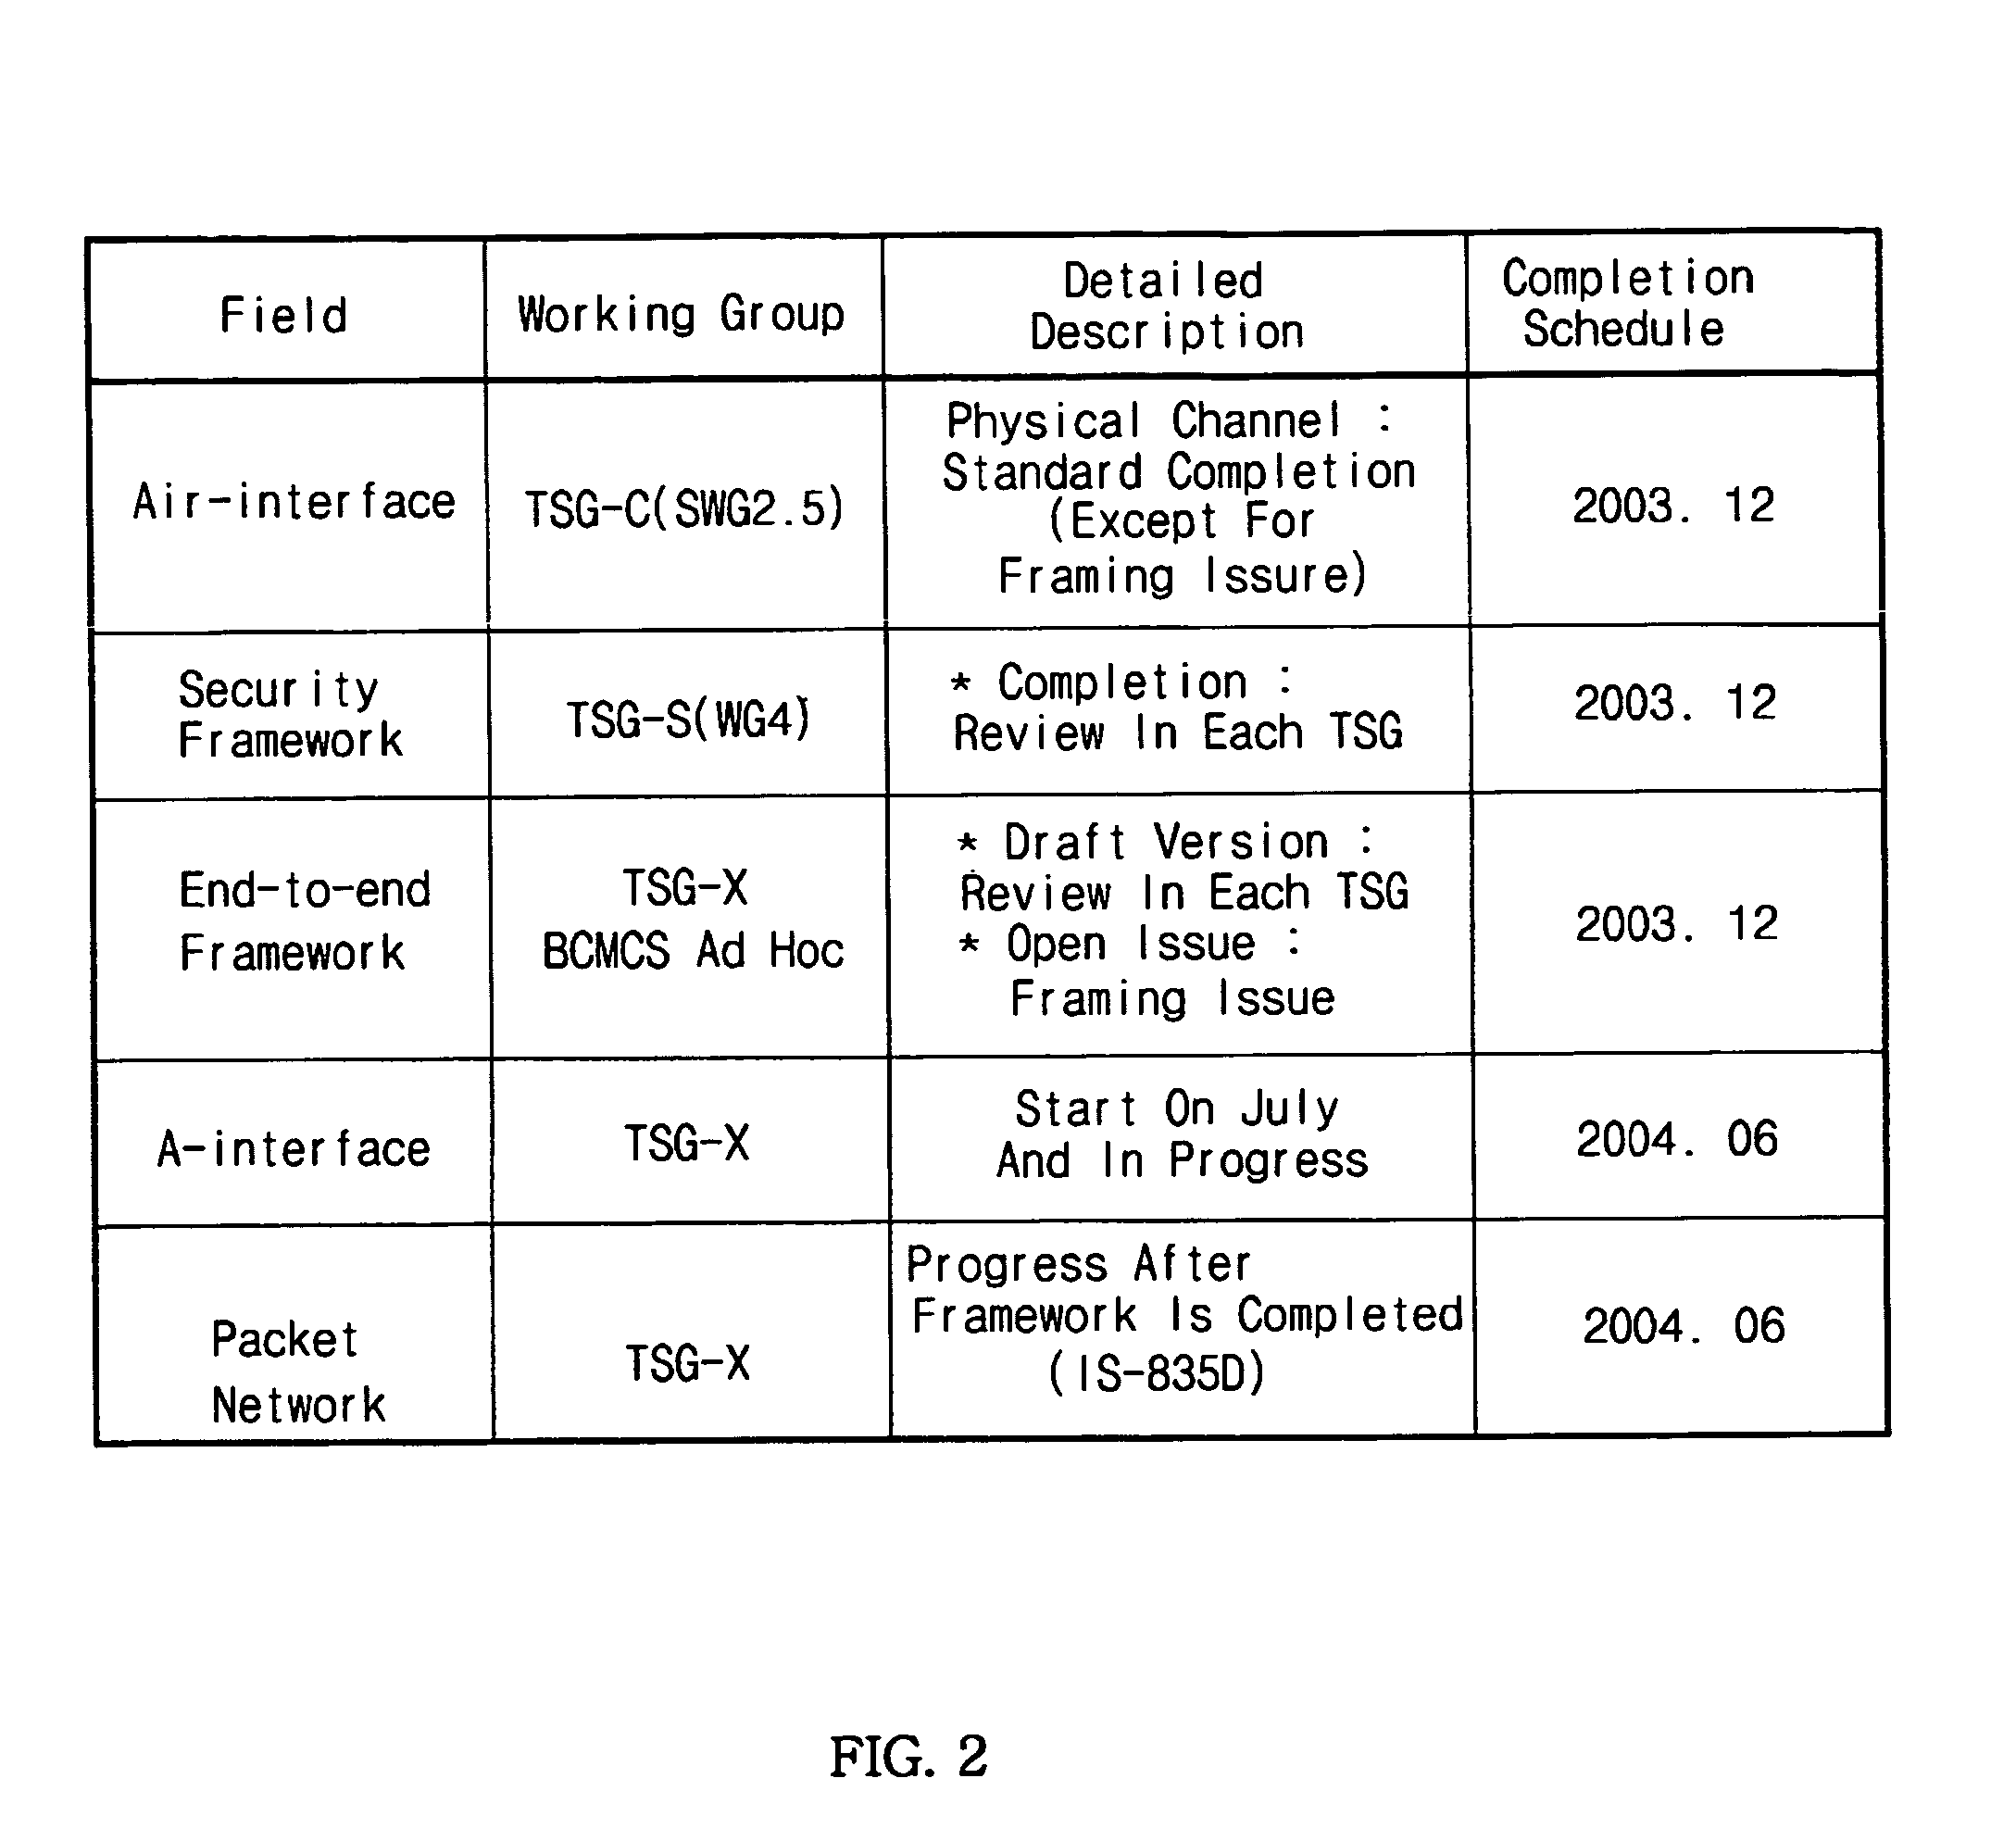 Method And Telecommunication System For Appointing Frequency Assignment Mode And/Or Broadcast/Multicast Service Assignment Ration For Providing Broadcast/Multicast Service